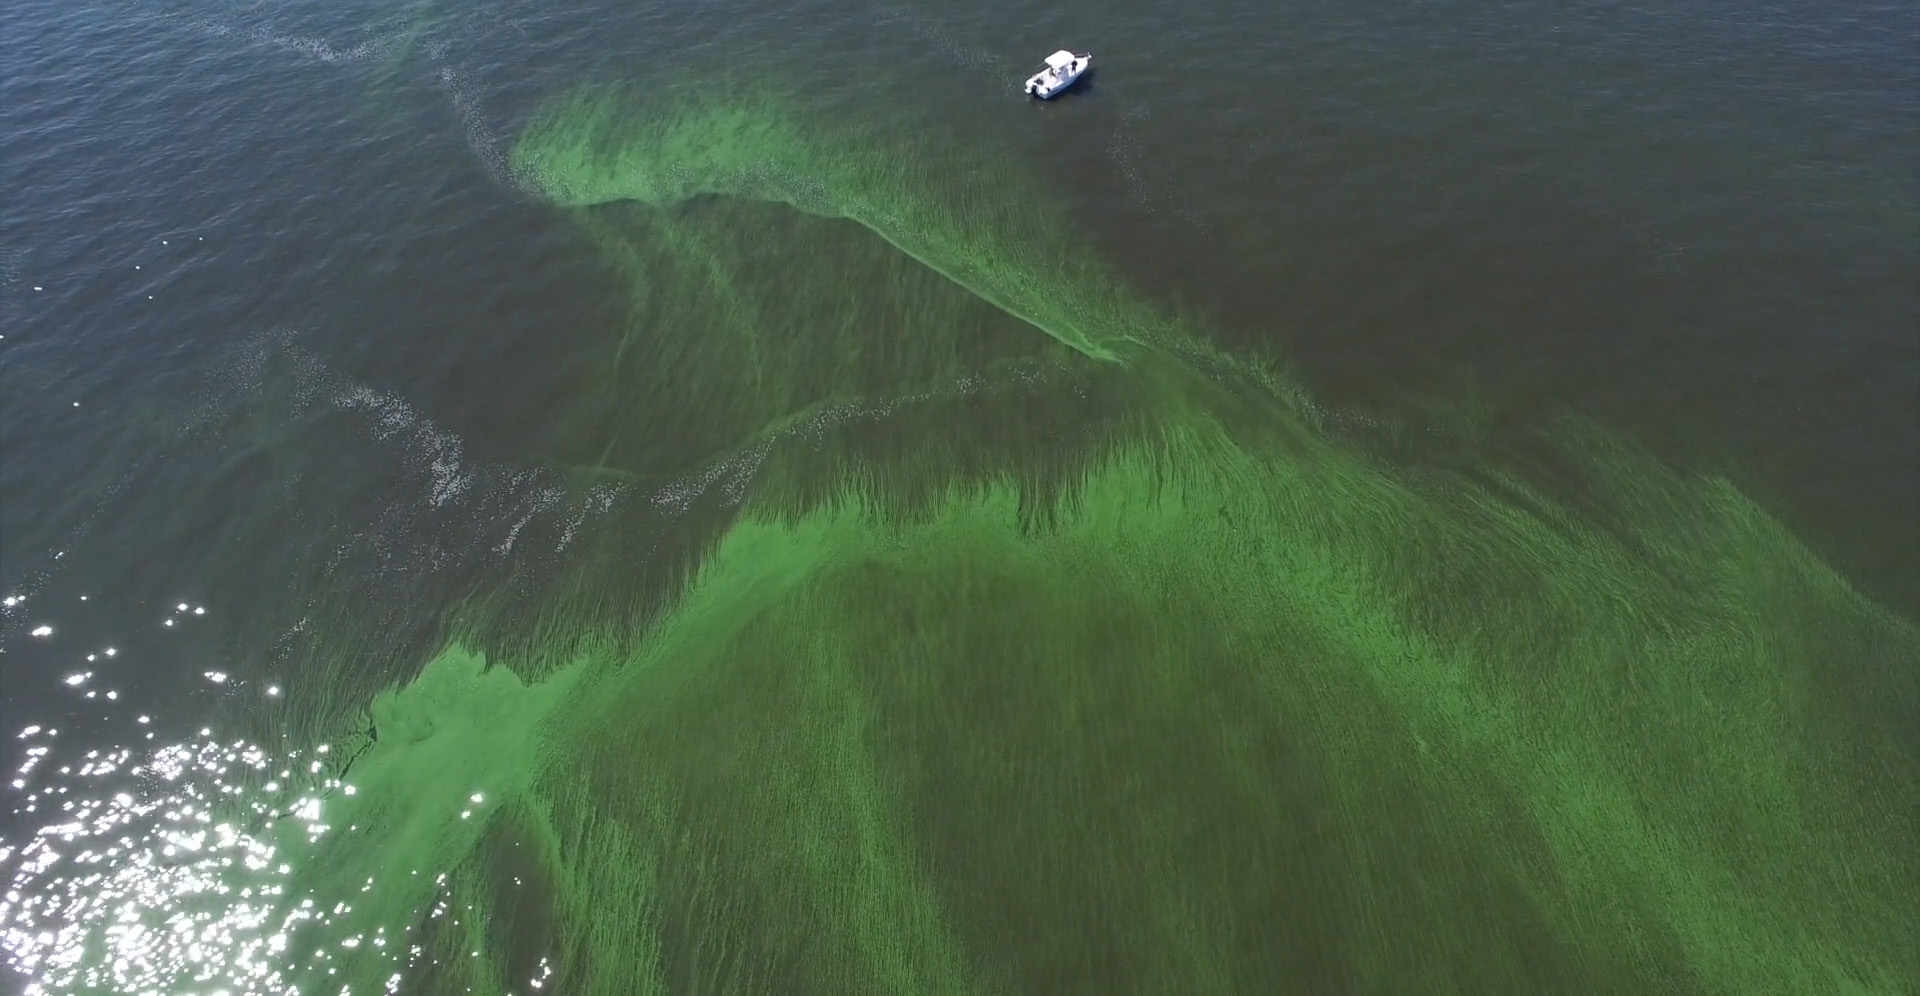 aerial view of cyanobacteria bloom in Maumee Bay, near Toldeo, Ohio, July 2015